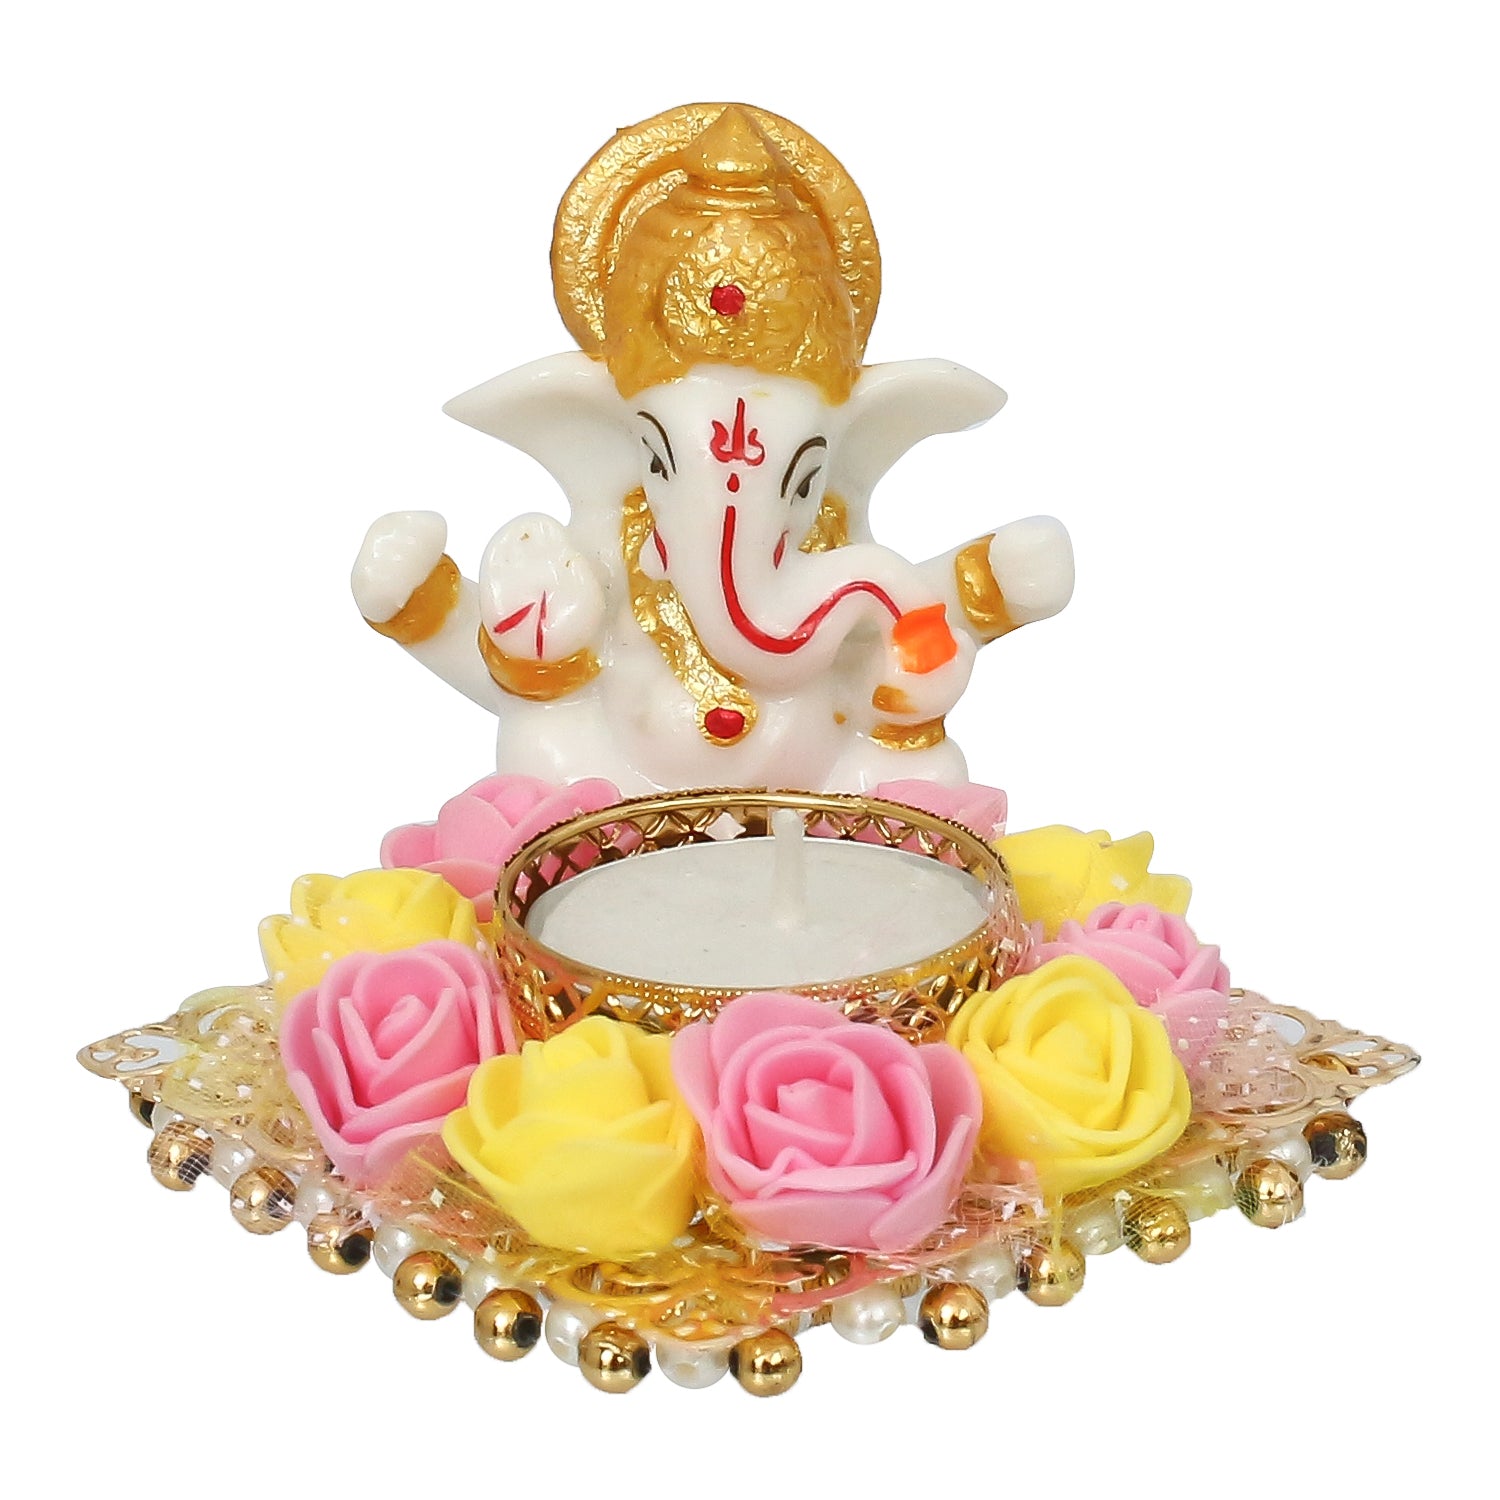 Polyresin Lord Ganesha Idol on Decorative Metal Plate with Tea Light Holder (Pink, Yellow and White) 1